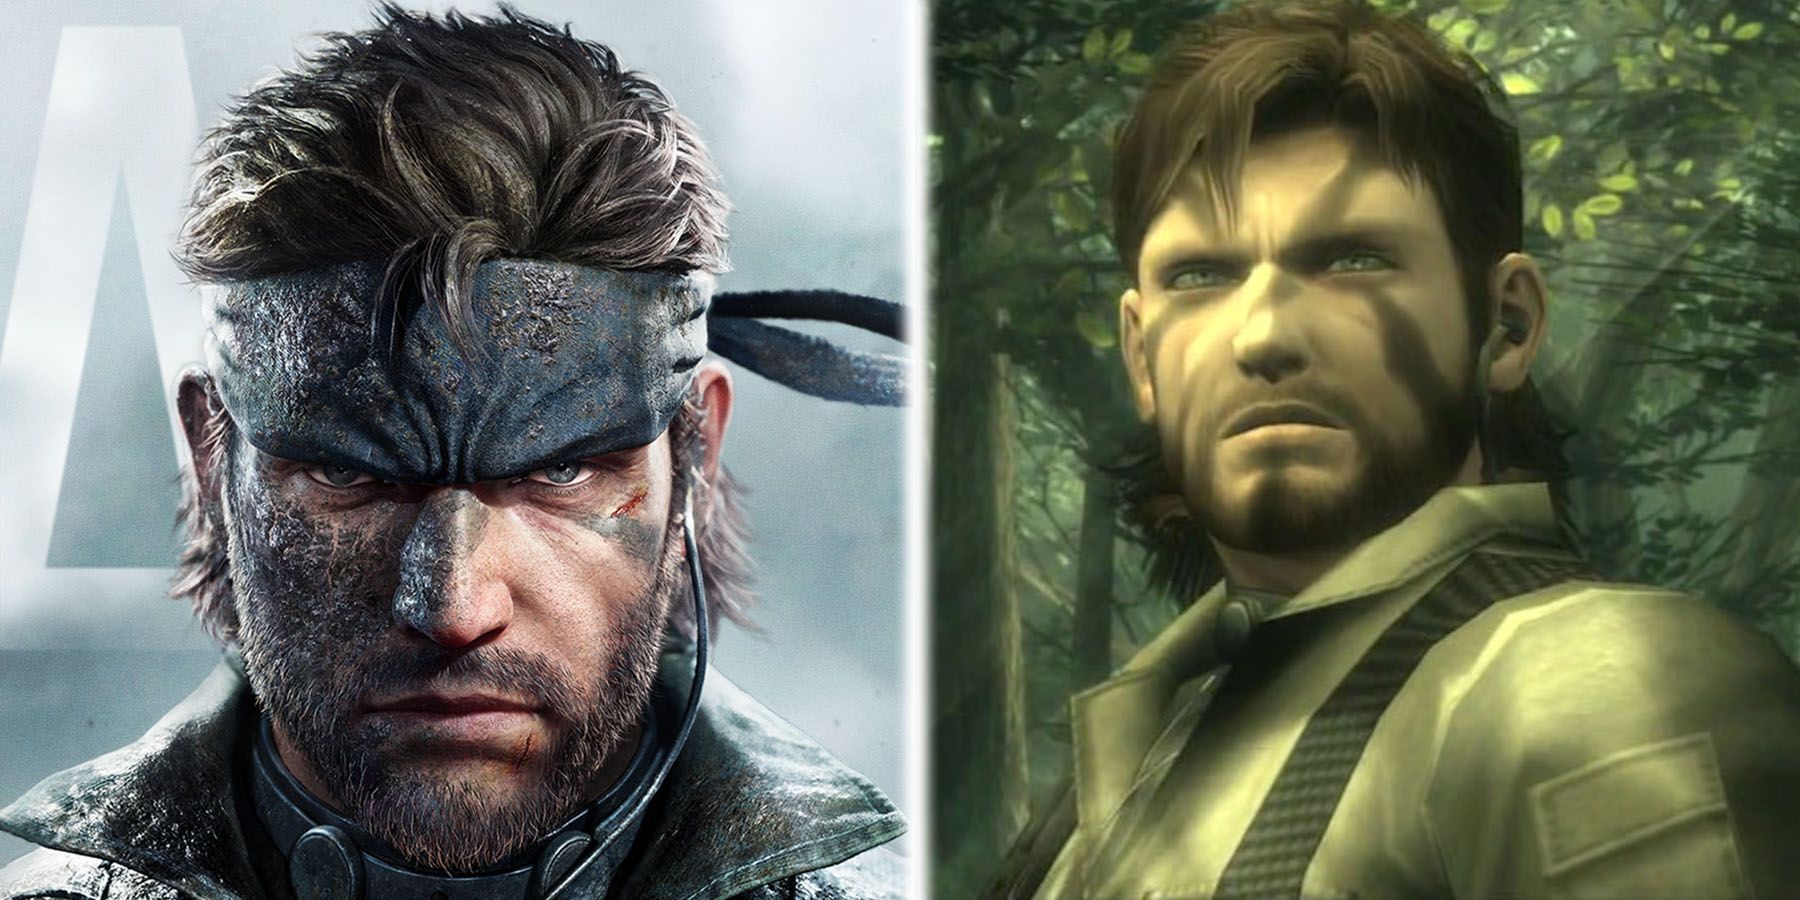 MGS3 remake Metal Gear Solid Delta: Snake Eater announced